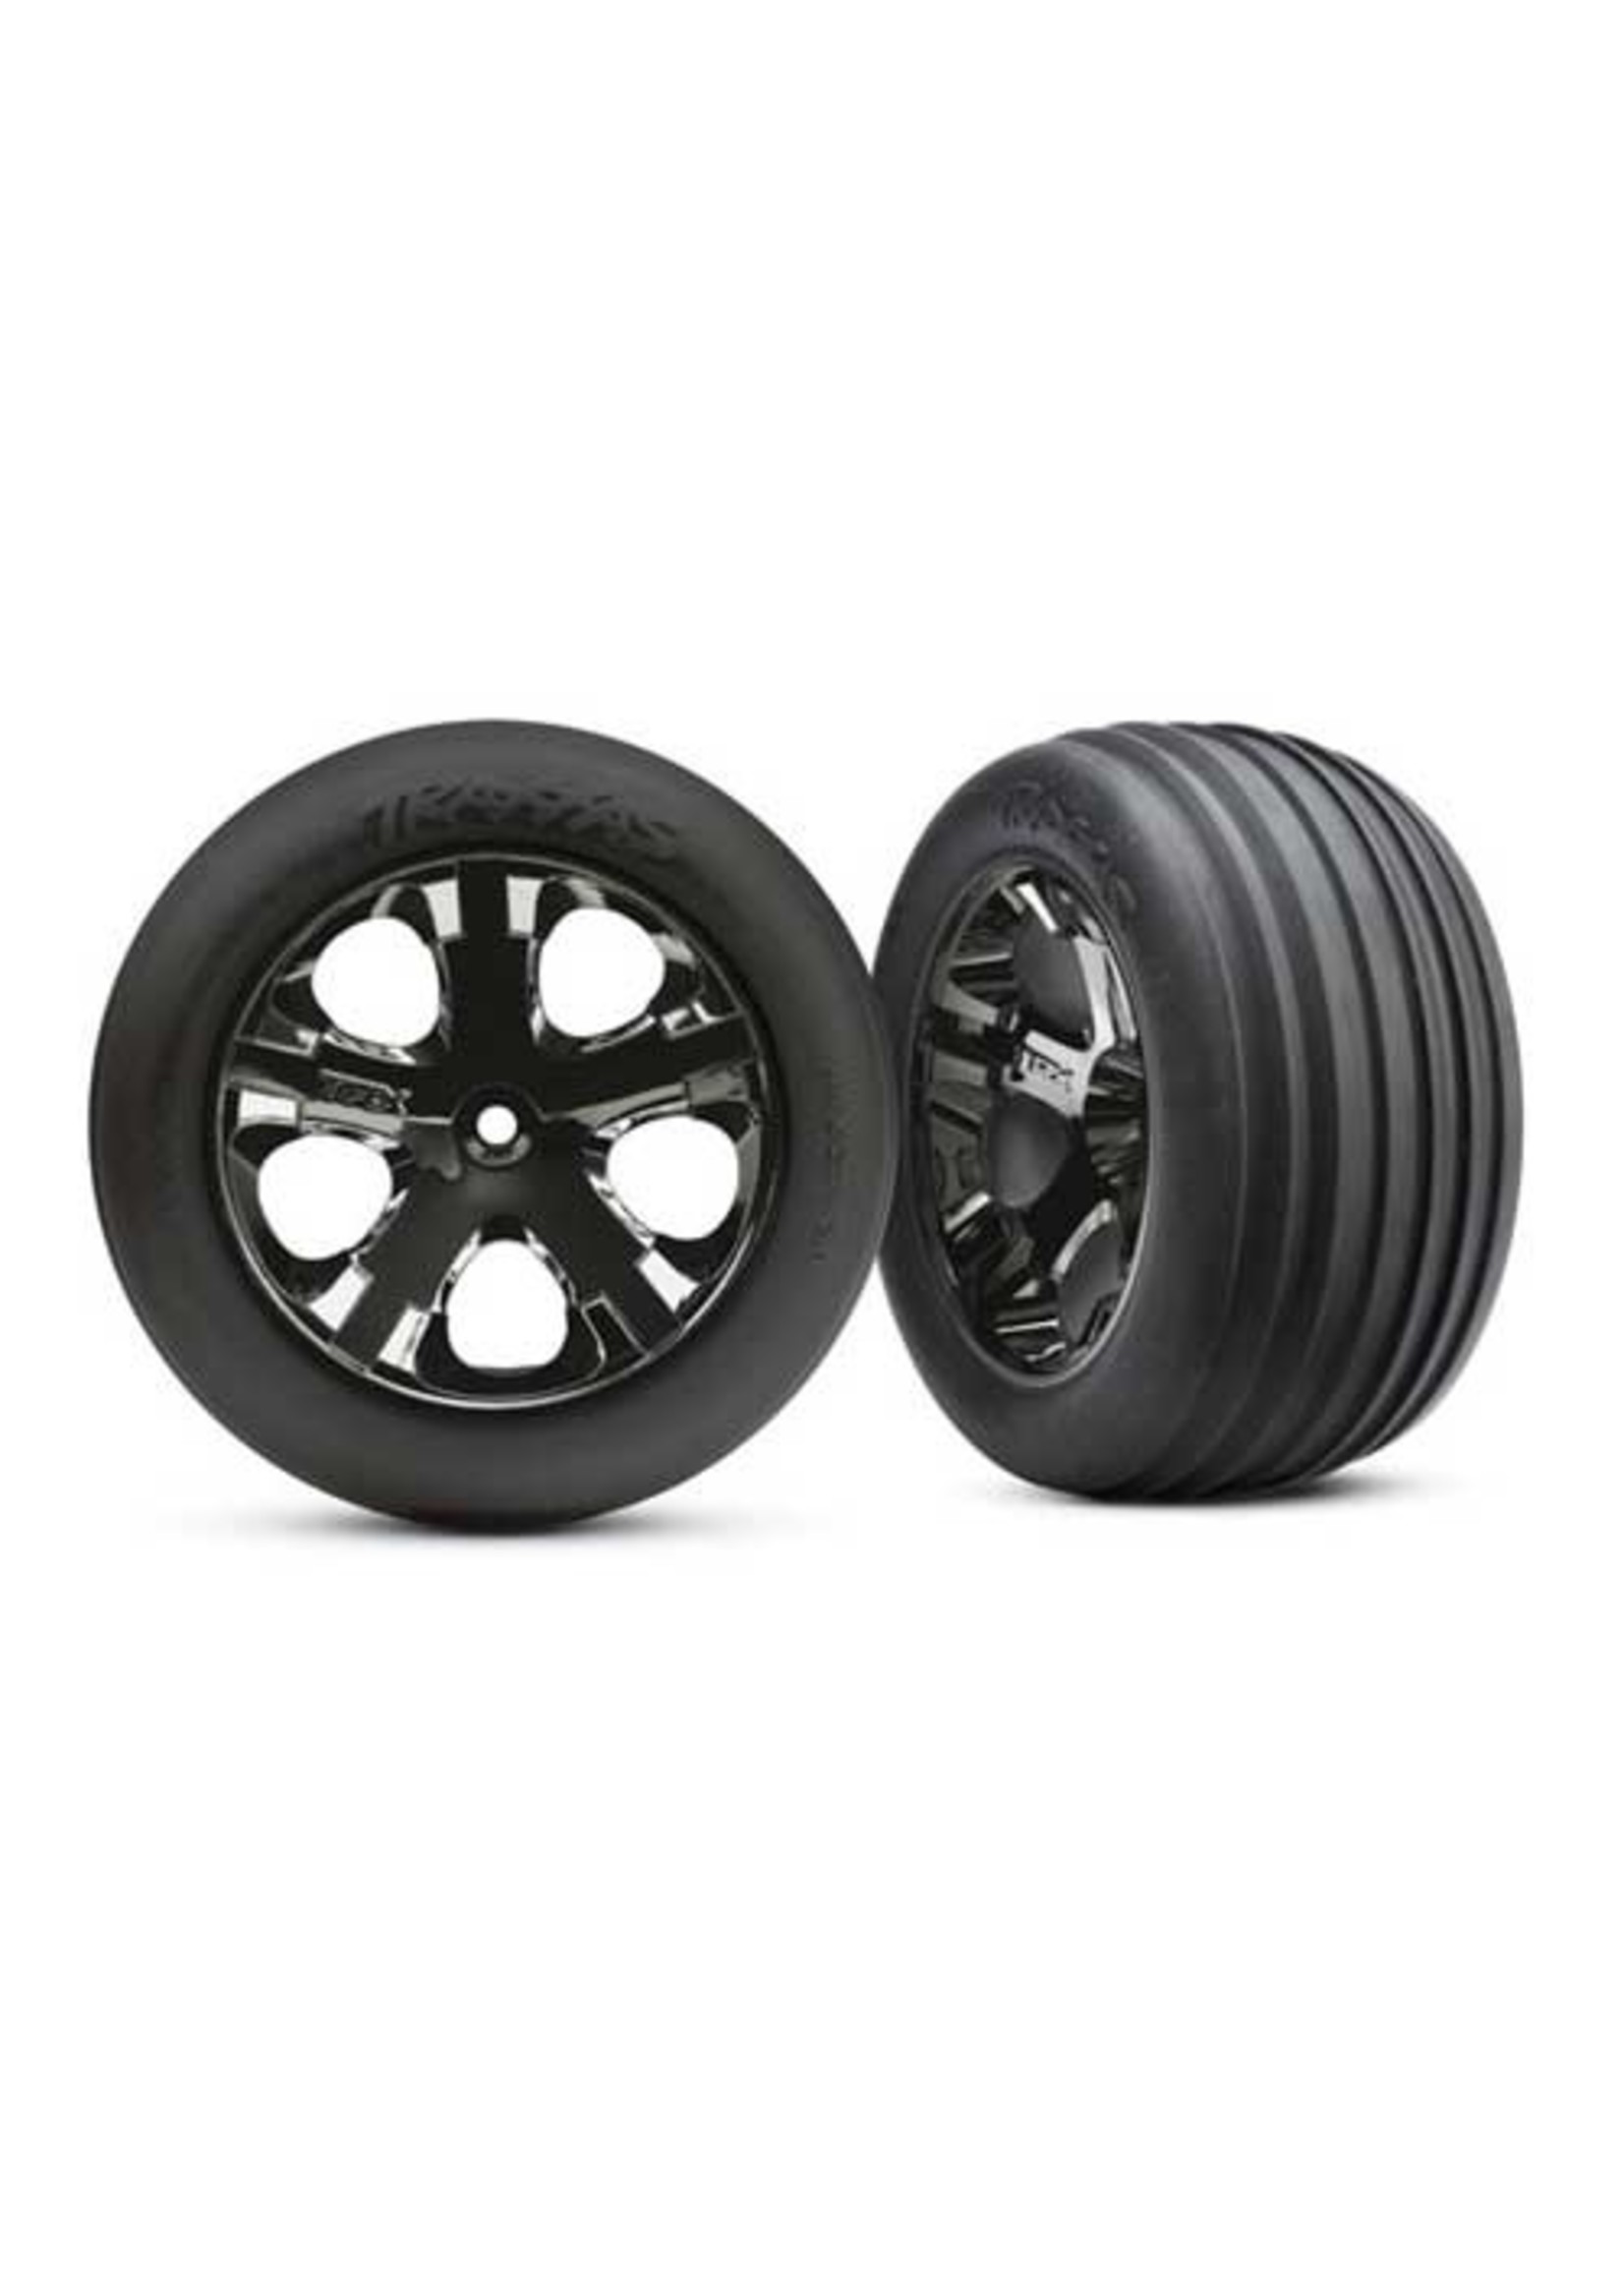 Traxxas TRA3771A Traxxas Tires & wheels, assembled, glued (2.8') (All-Star black chrome wheels, ribbed tires, foam inserts) (electric front) (2)